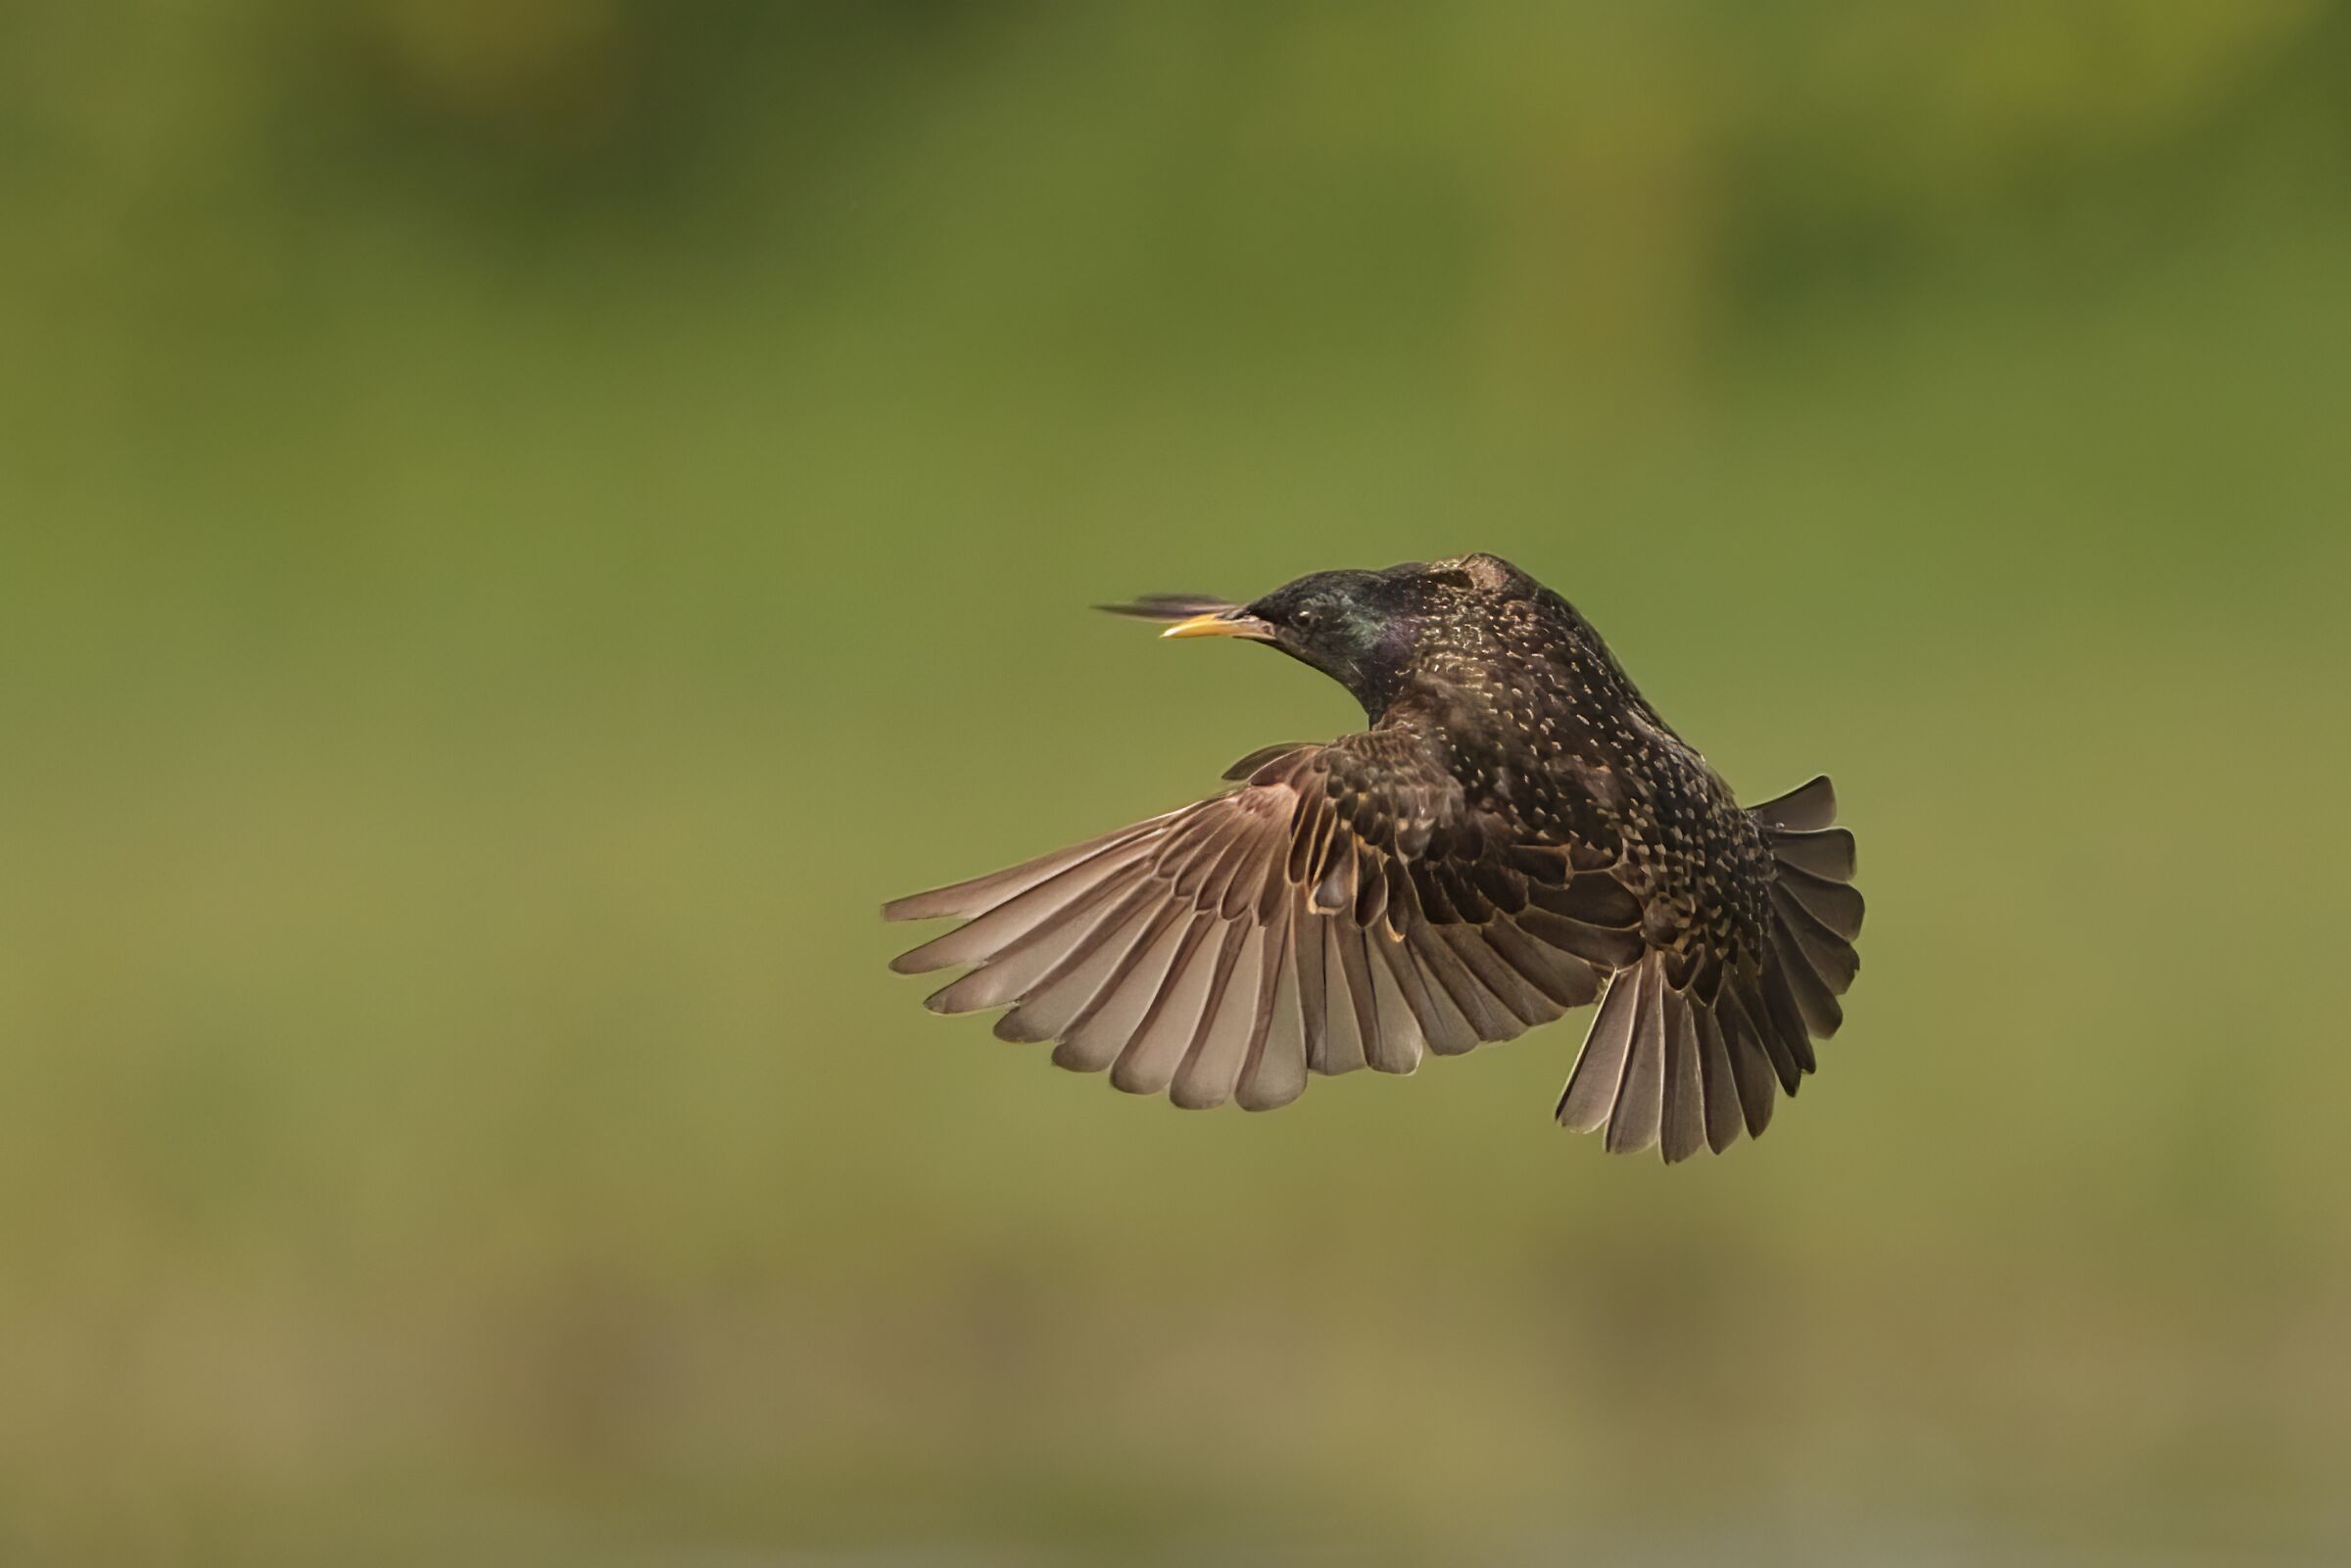 The flight of the starling...